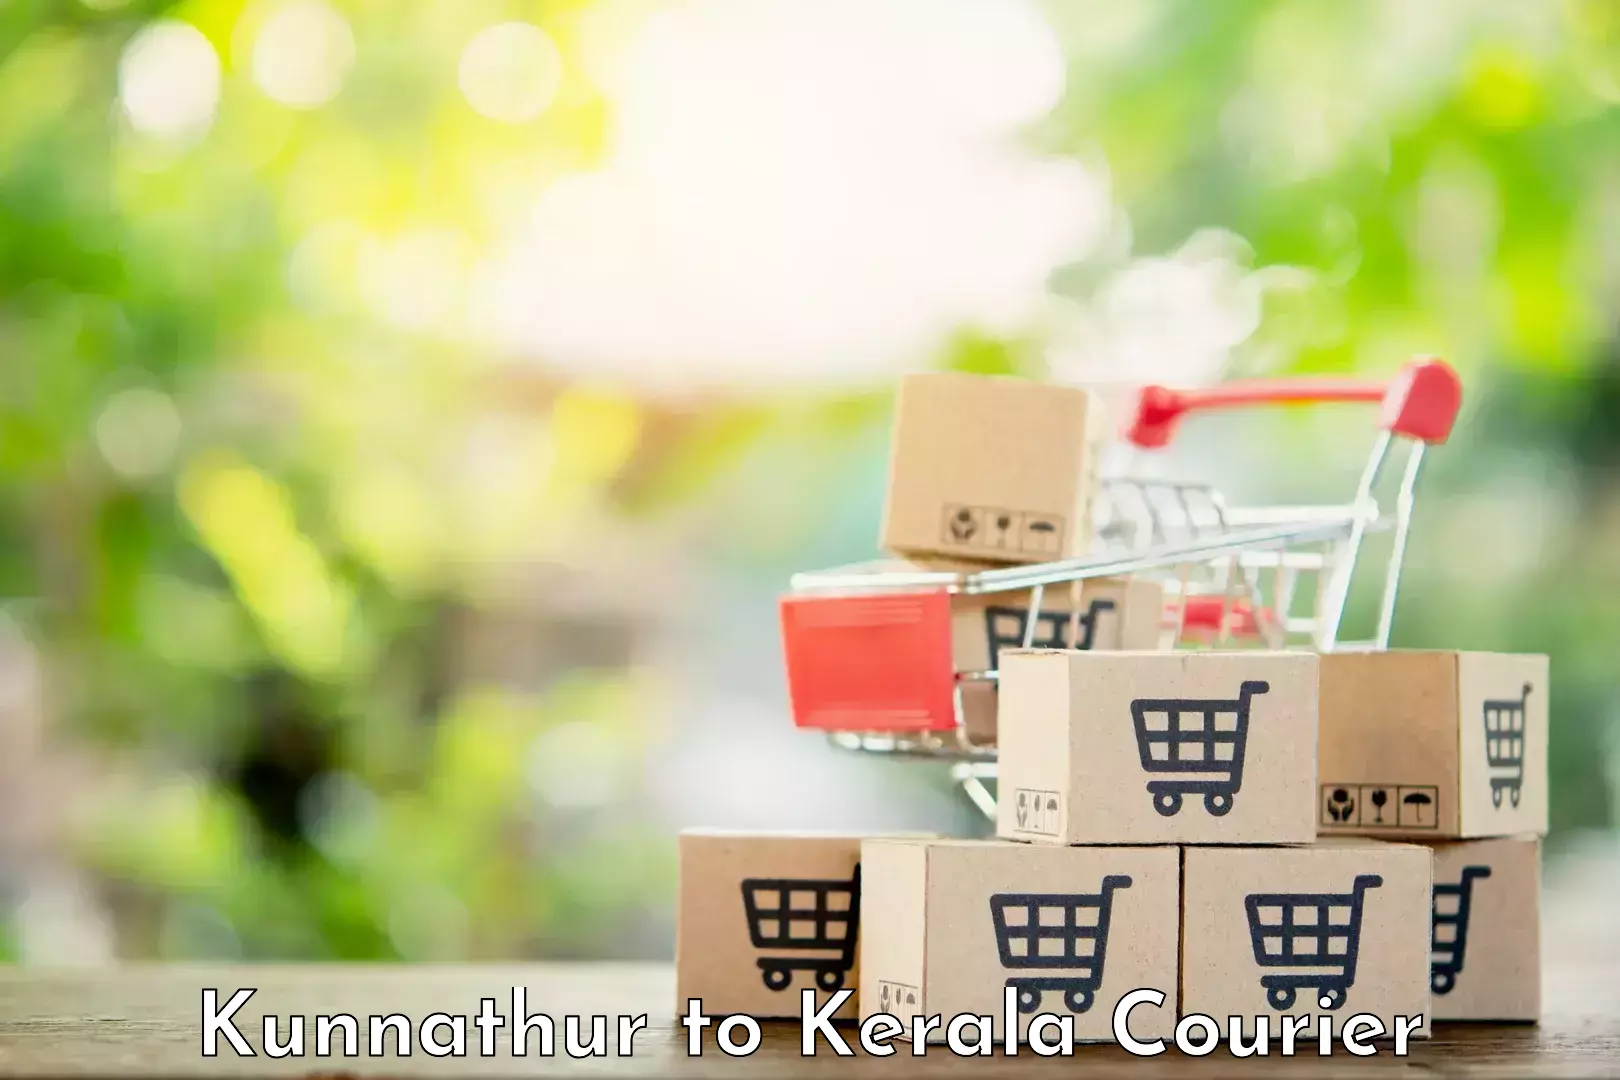 User-friendly delivery service in Kunnathur to Ranni